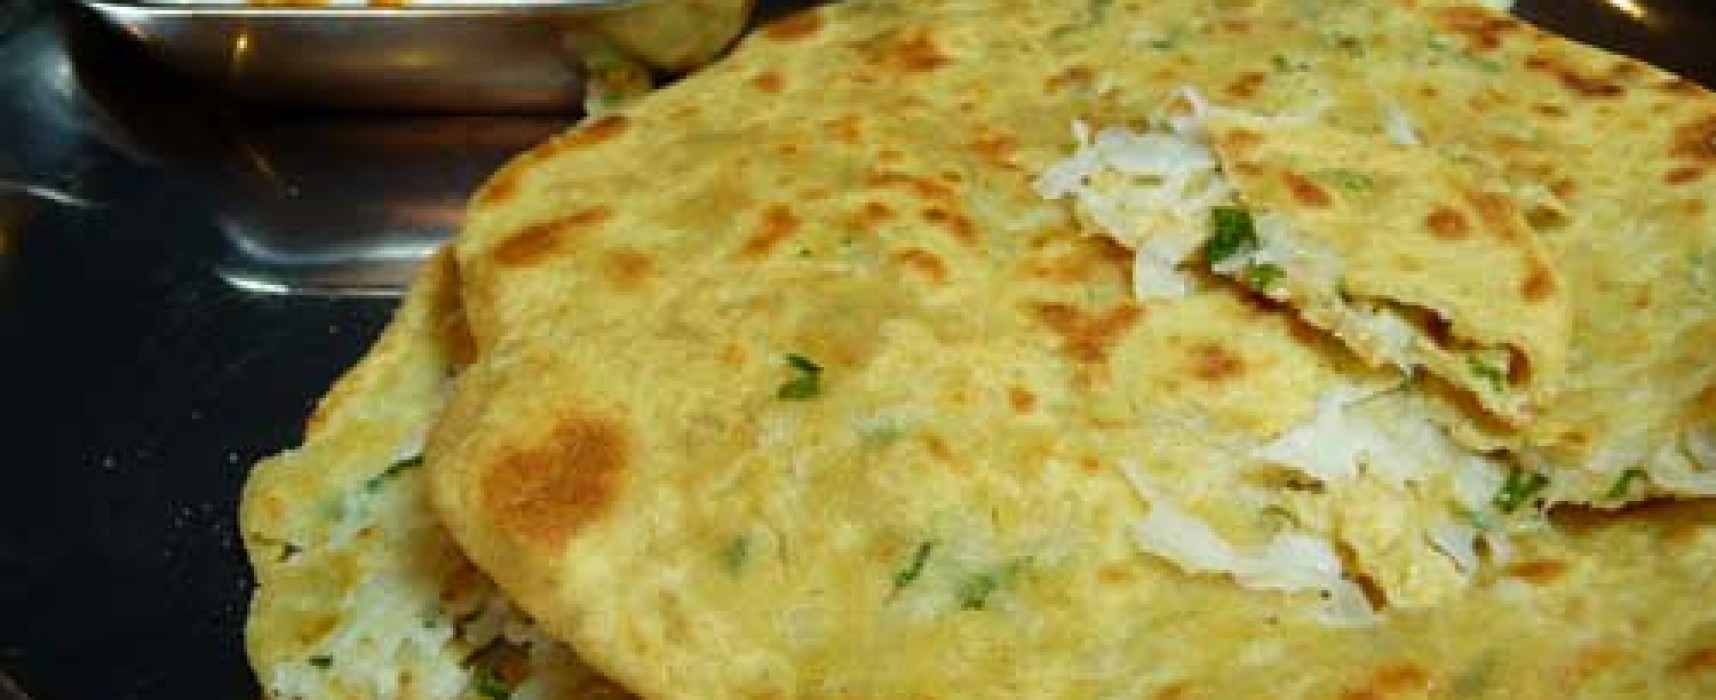 Stuffed Parathas from North India  !!!